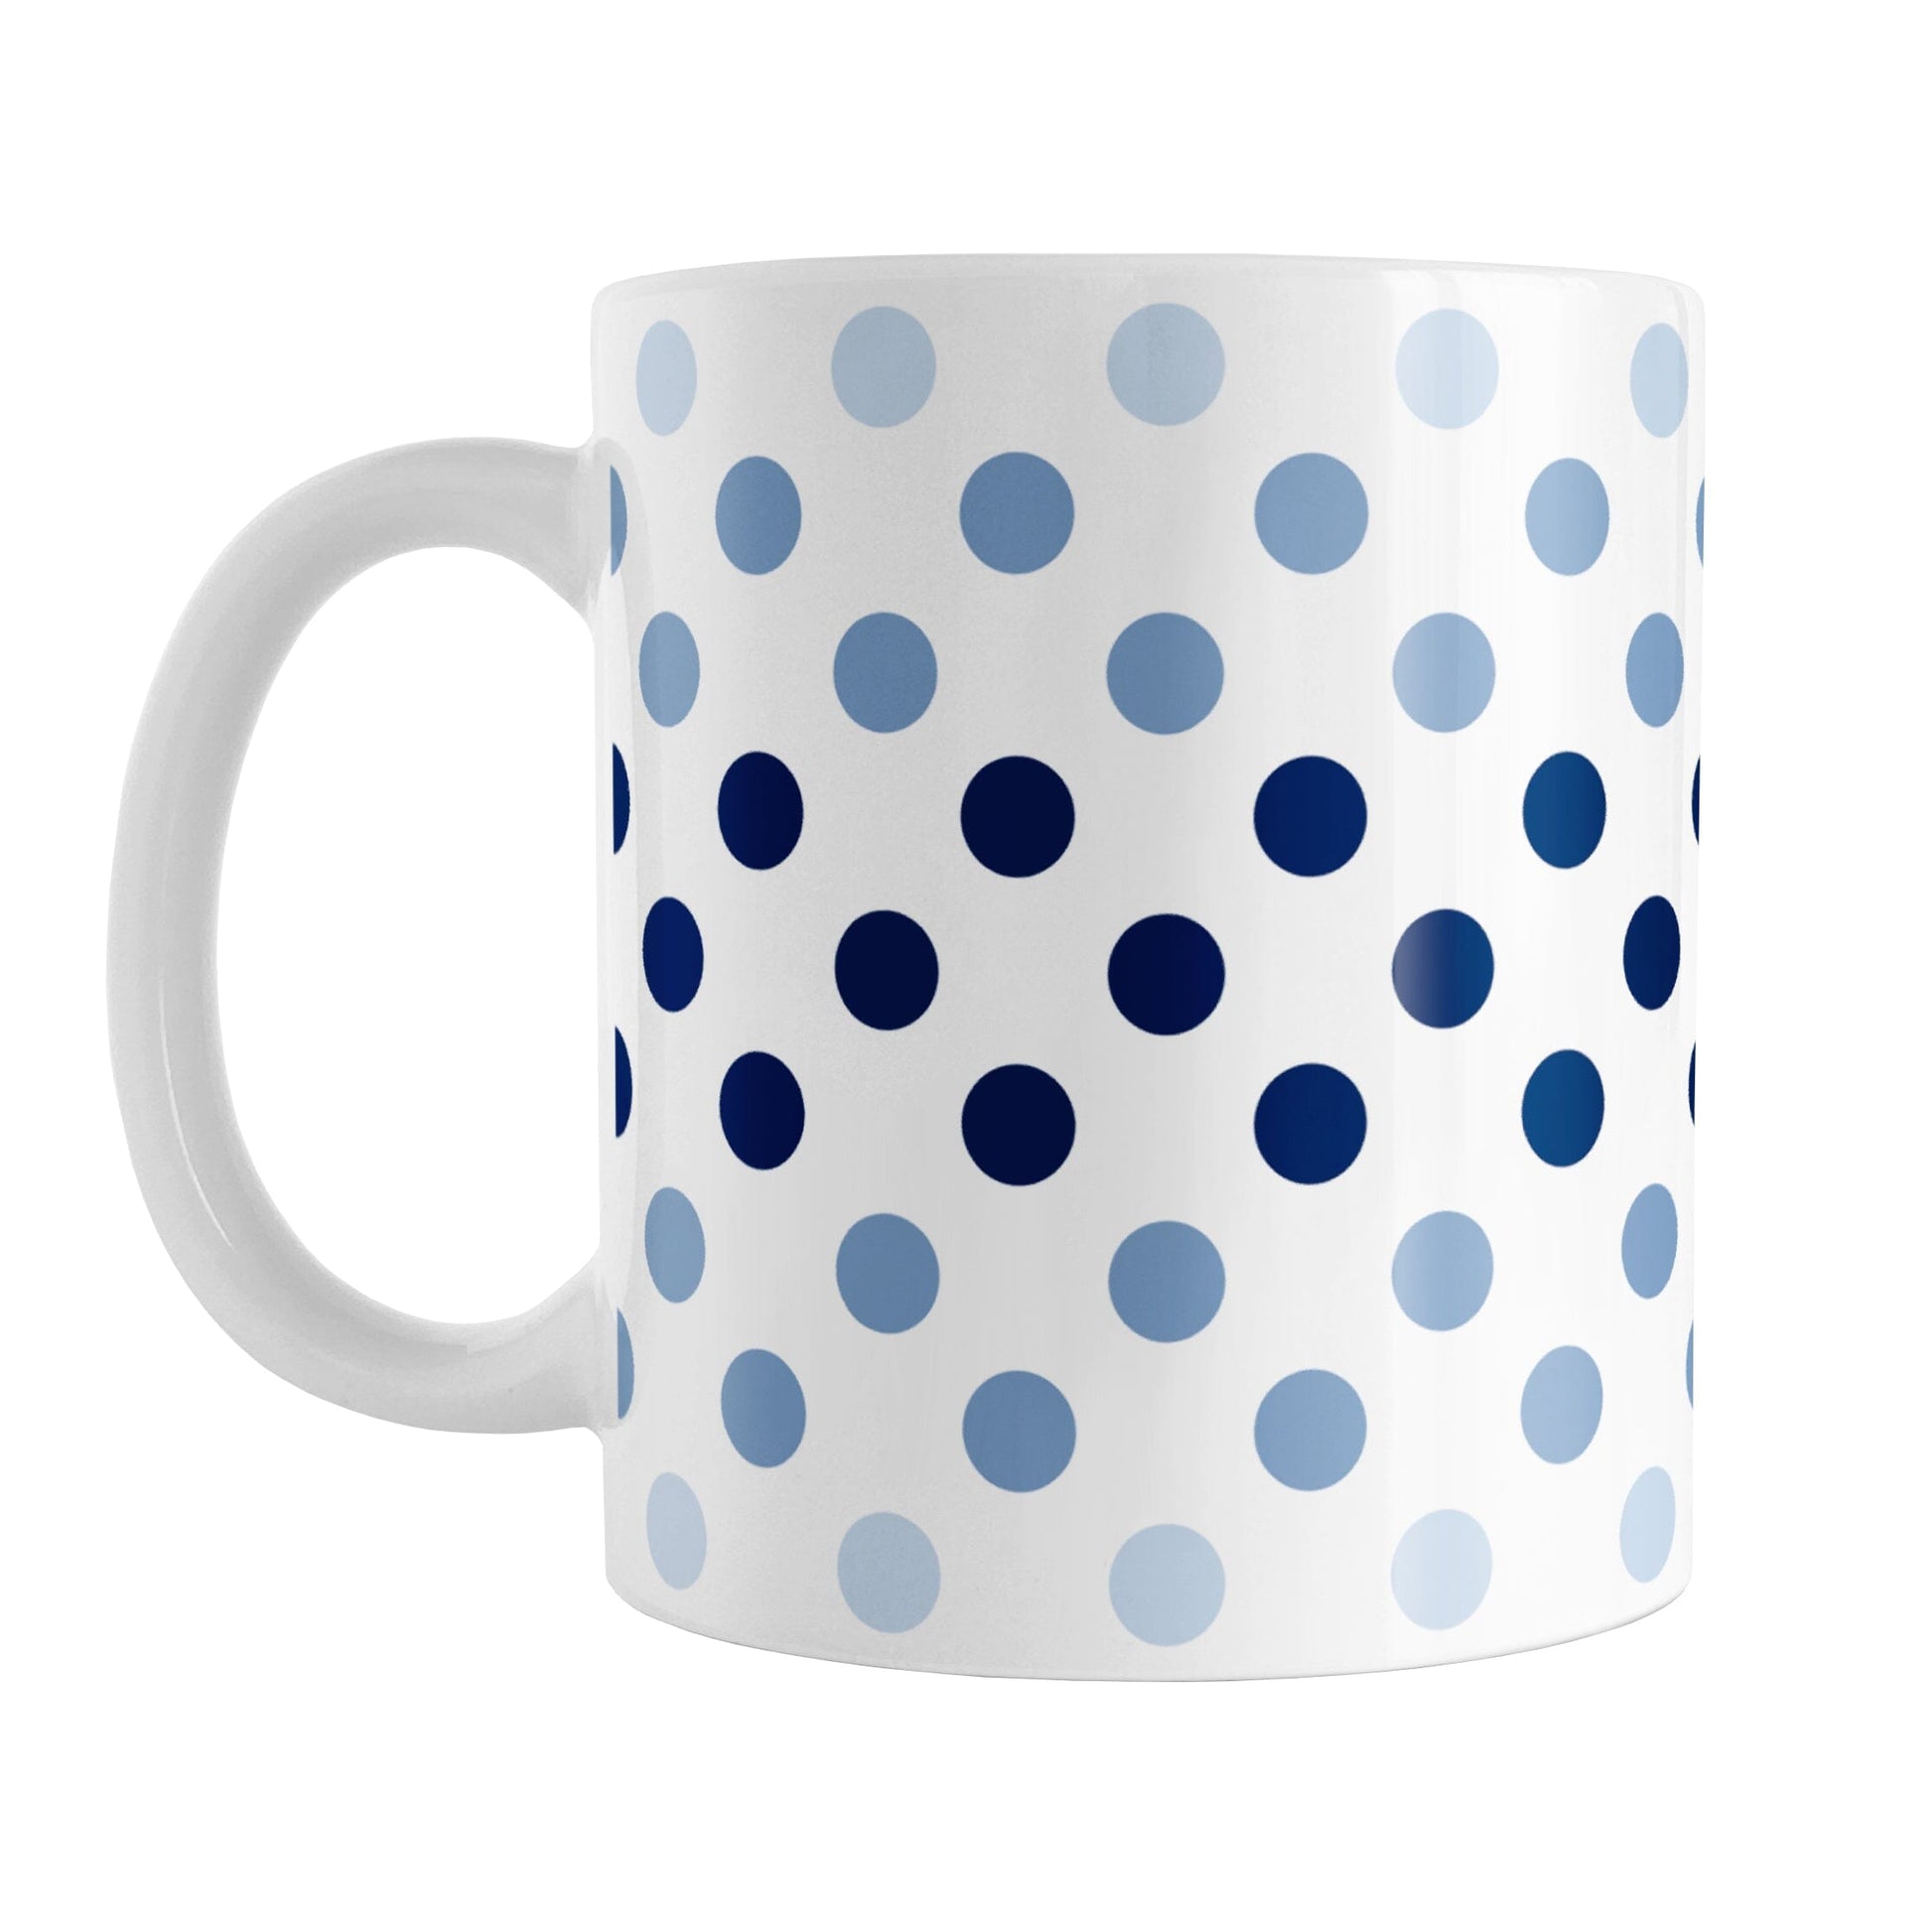 Polka Dots in Blue Mug (11oz) at Amy's Coffee Mugs. A ceramic coffee mug designed with polka dots in different shades of blue, with the darker blue color across the middle and the lighter blue along the top and bottom, in a pattern that wraps around the mug to the handle. 